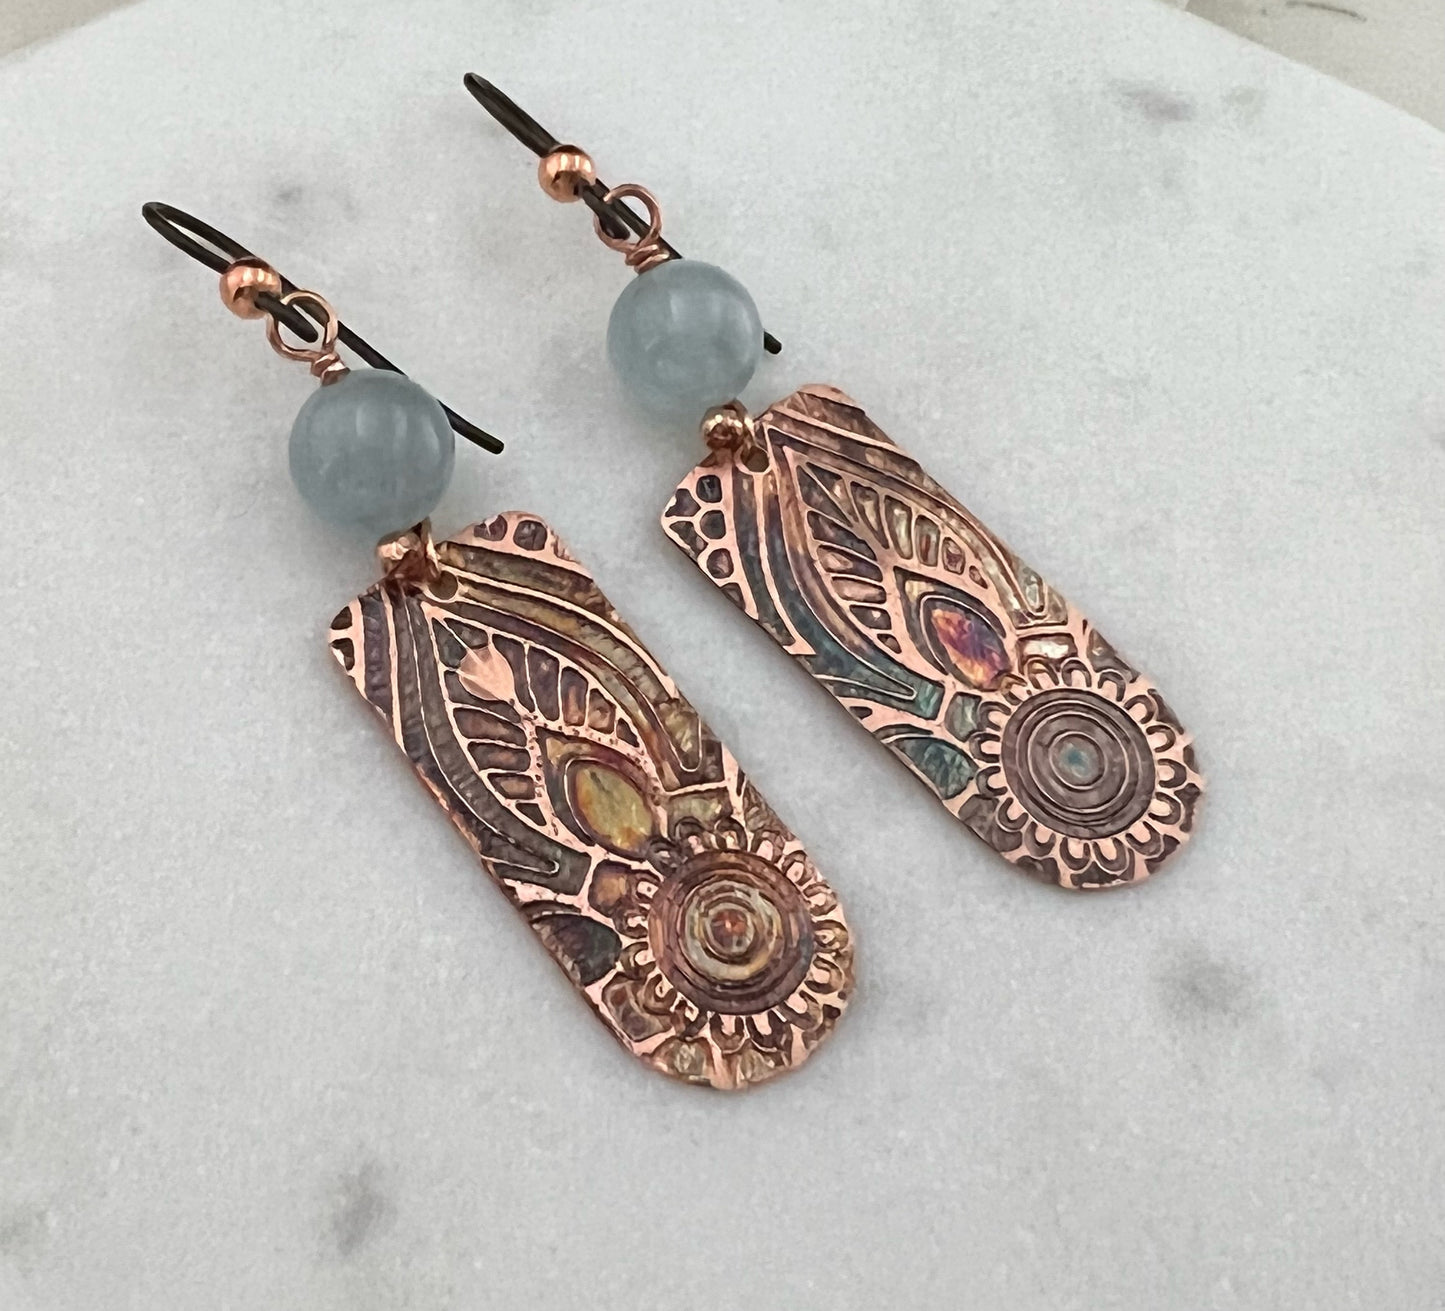 Acid  etched copper earrings with aquamarine gemstones